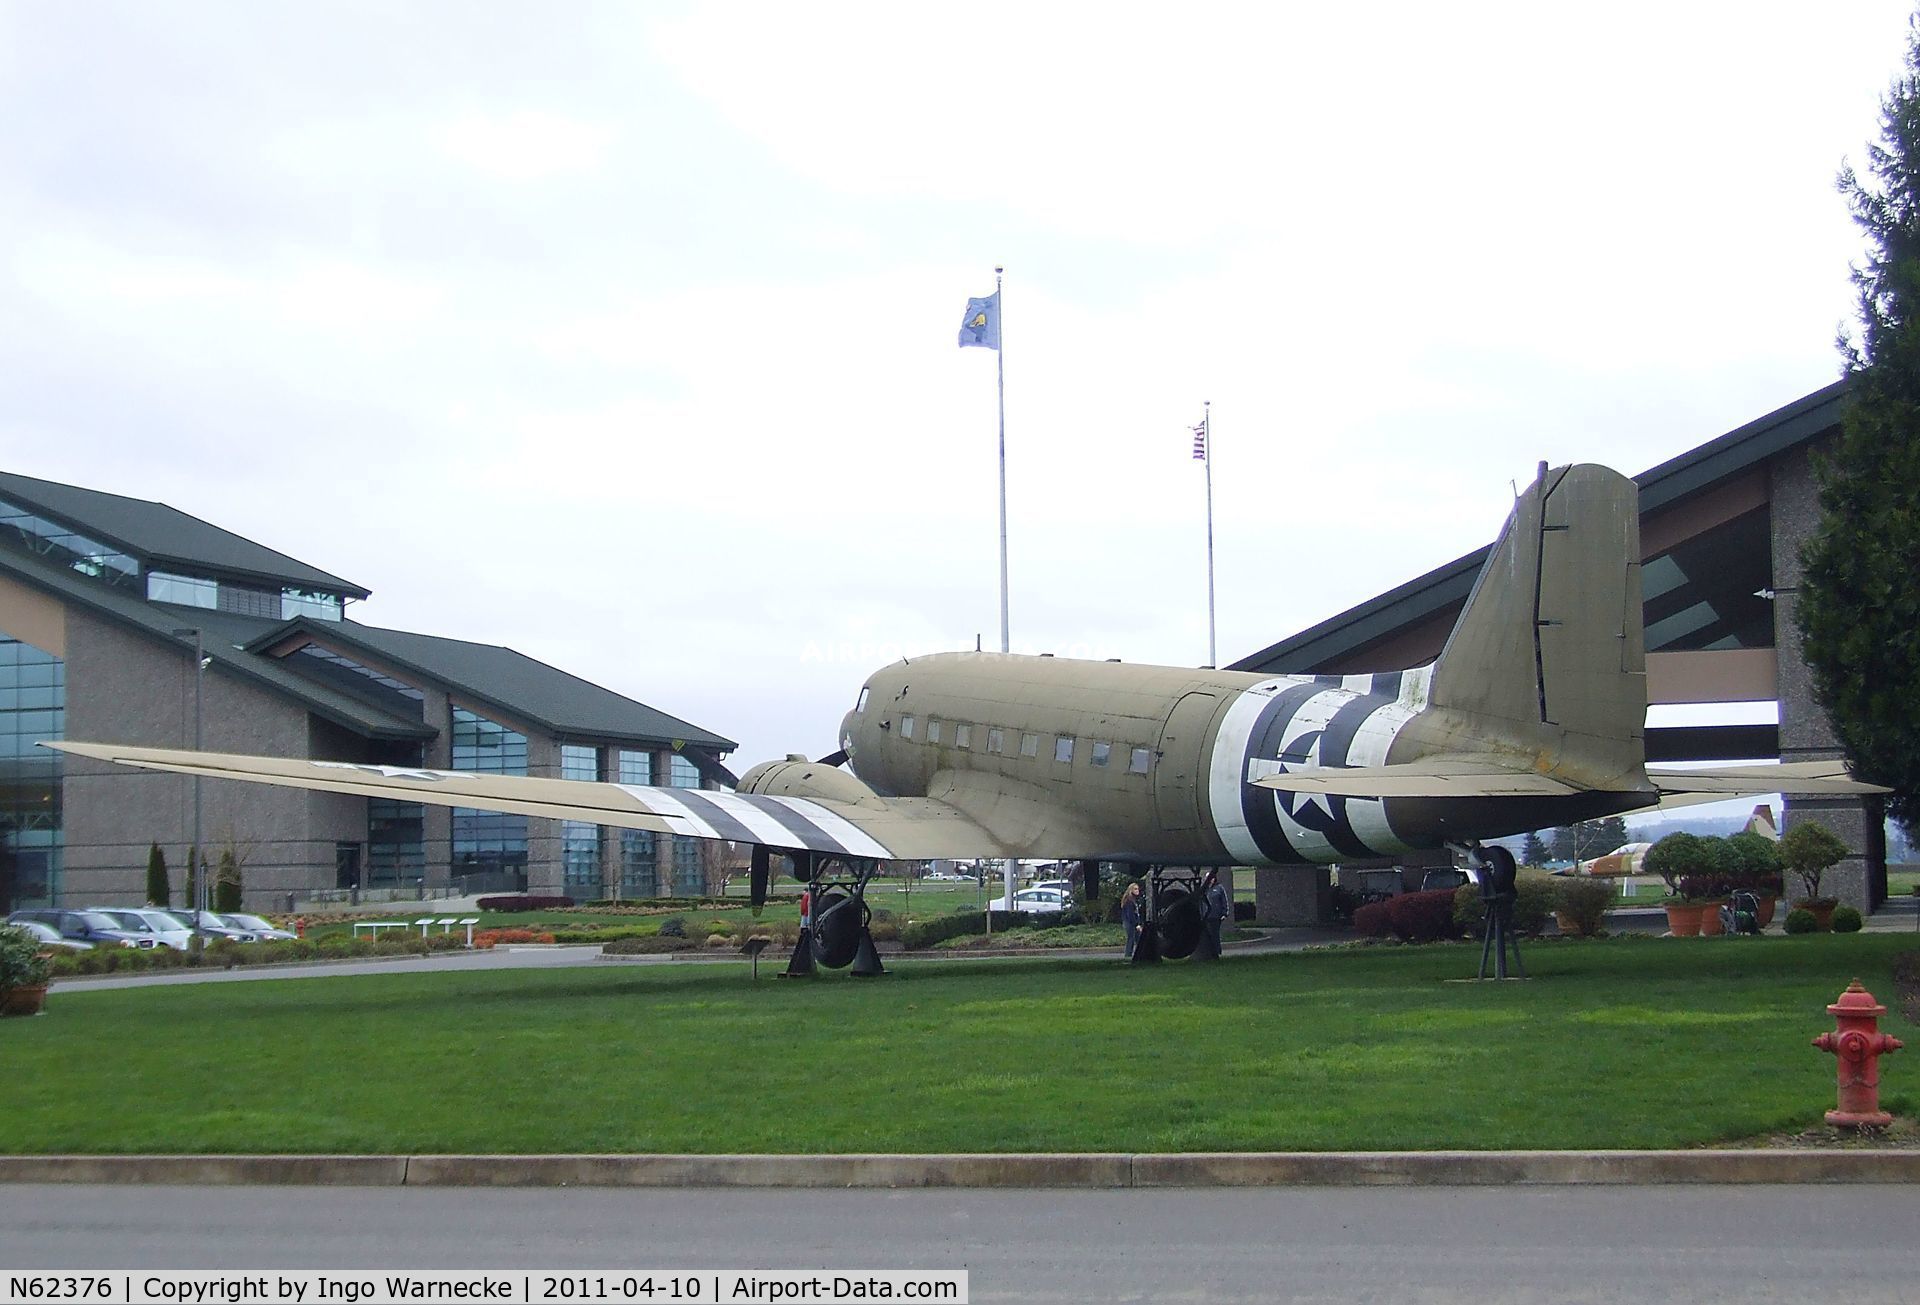 N62376, 1944 Douglas C-47A Skytrain C/N 19978, Douglas C-47A Skytrain at the Evergreen Aviation & Space Museum, McMinnville OR